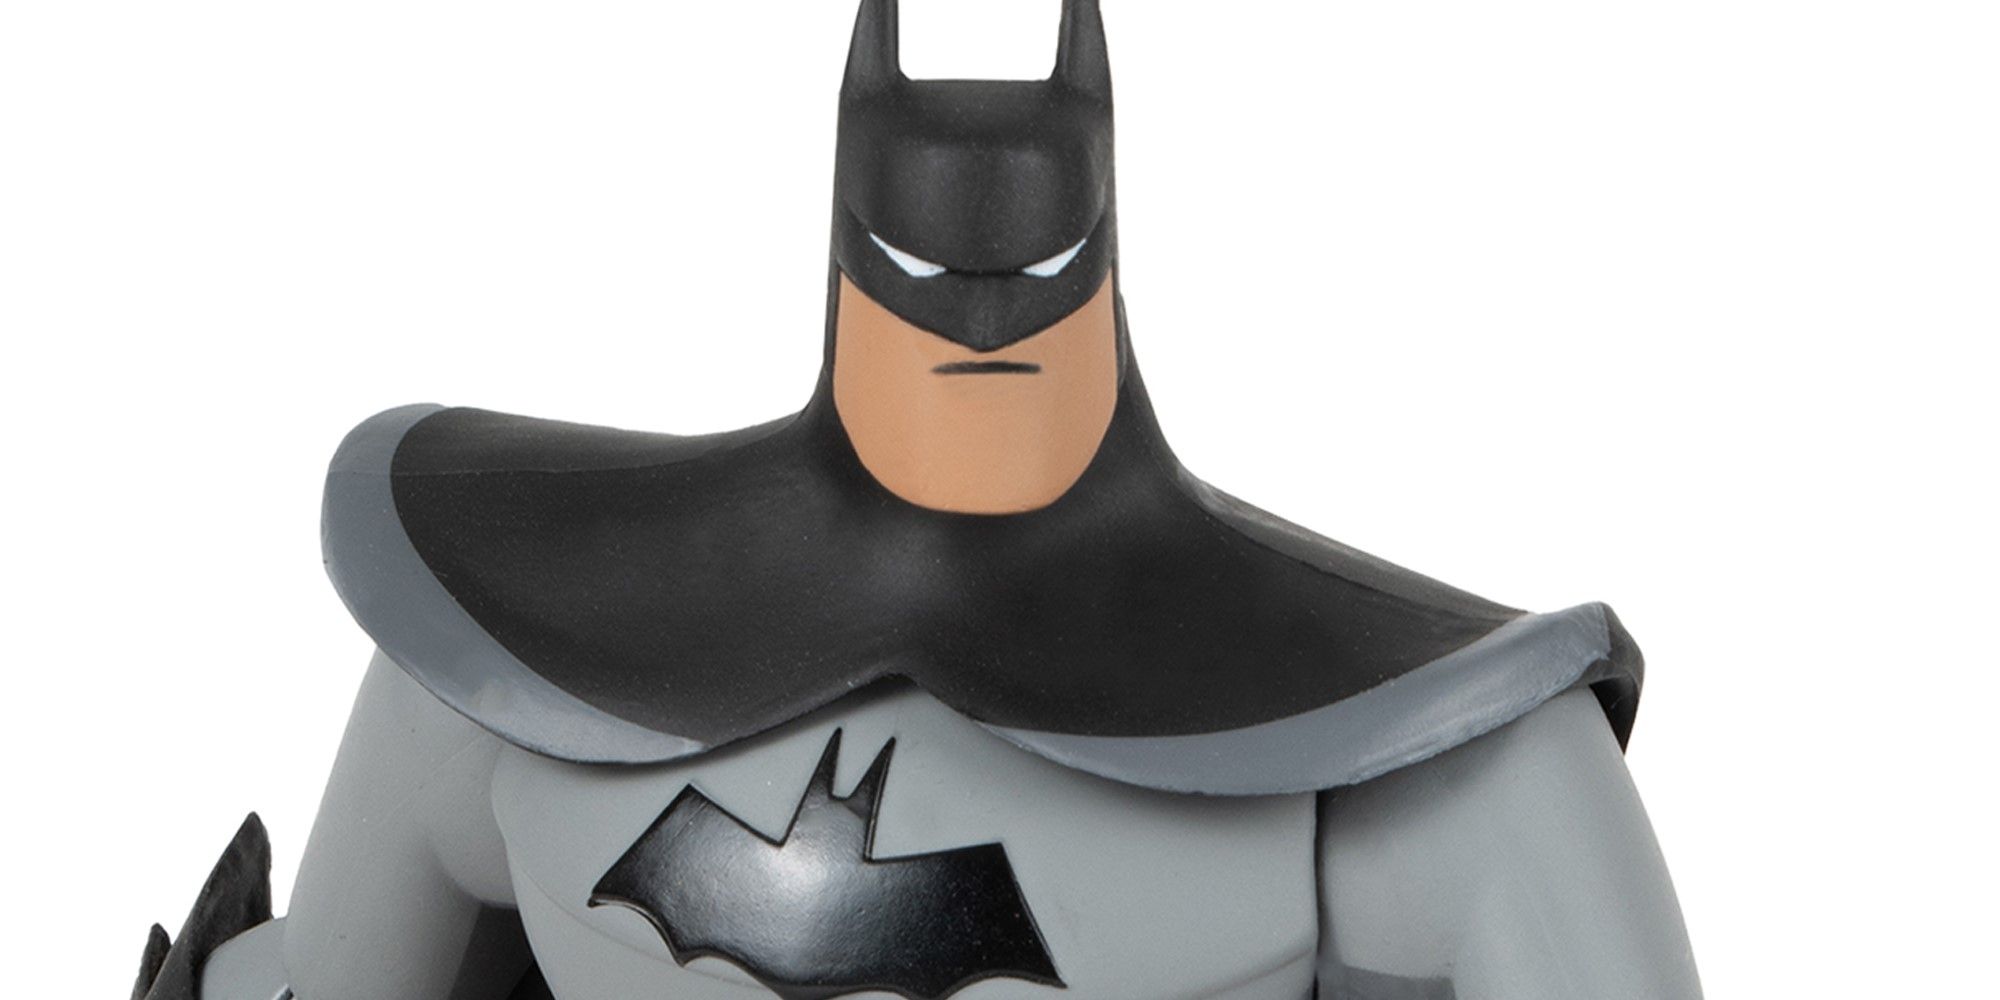 Batman: the Adventure Continues Images Reveal New Cartoon-Accurate Figures